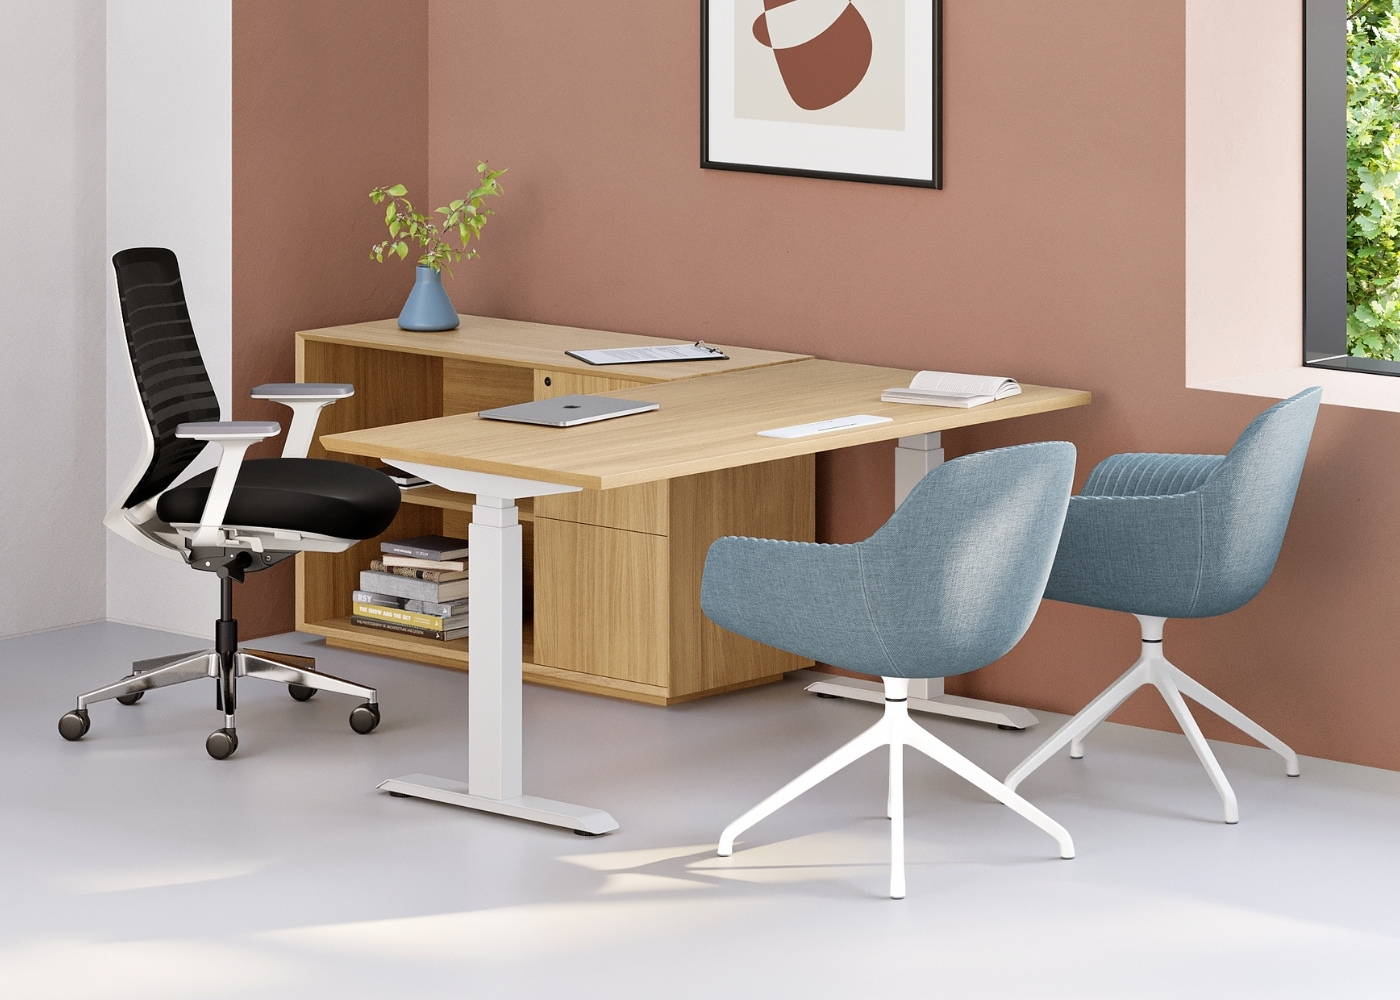 How to pick furniture for your new office.